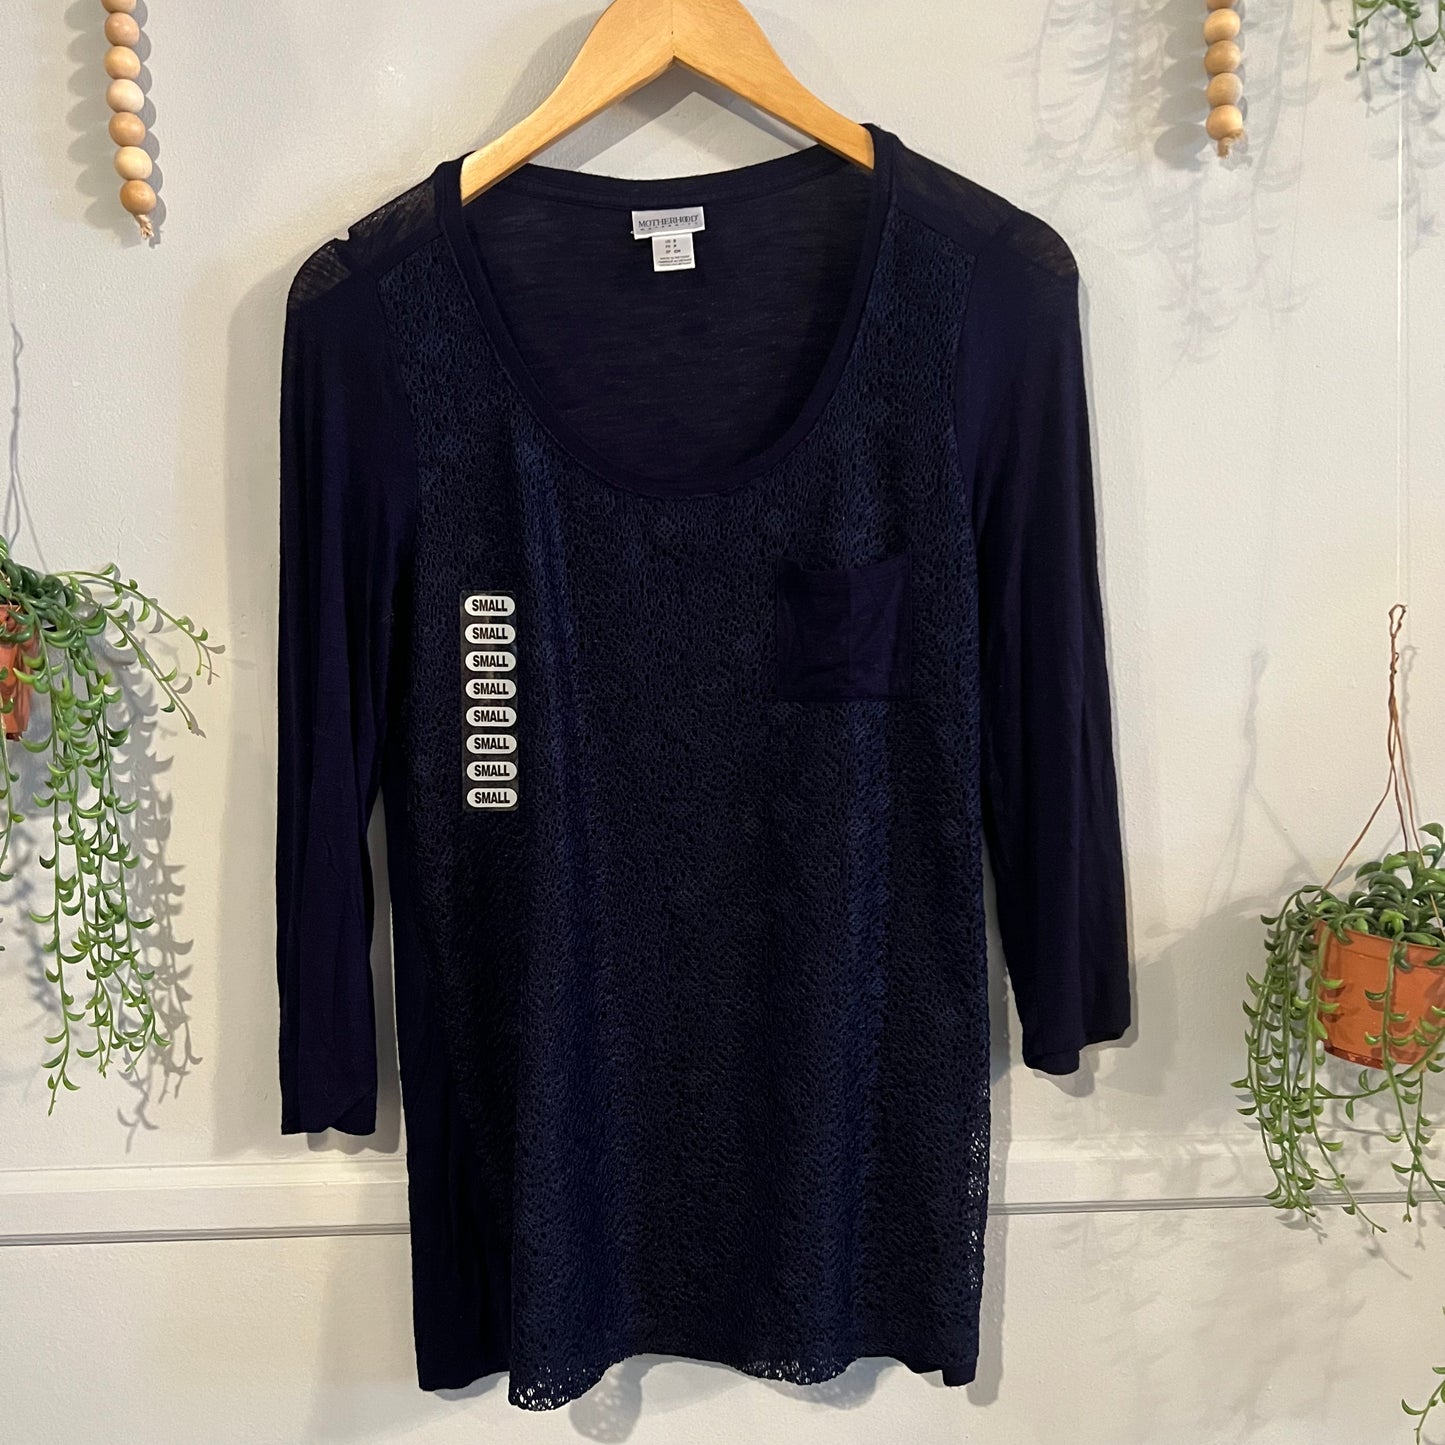 Crocheted round neck LS tee with pocket, Navy